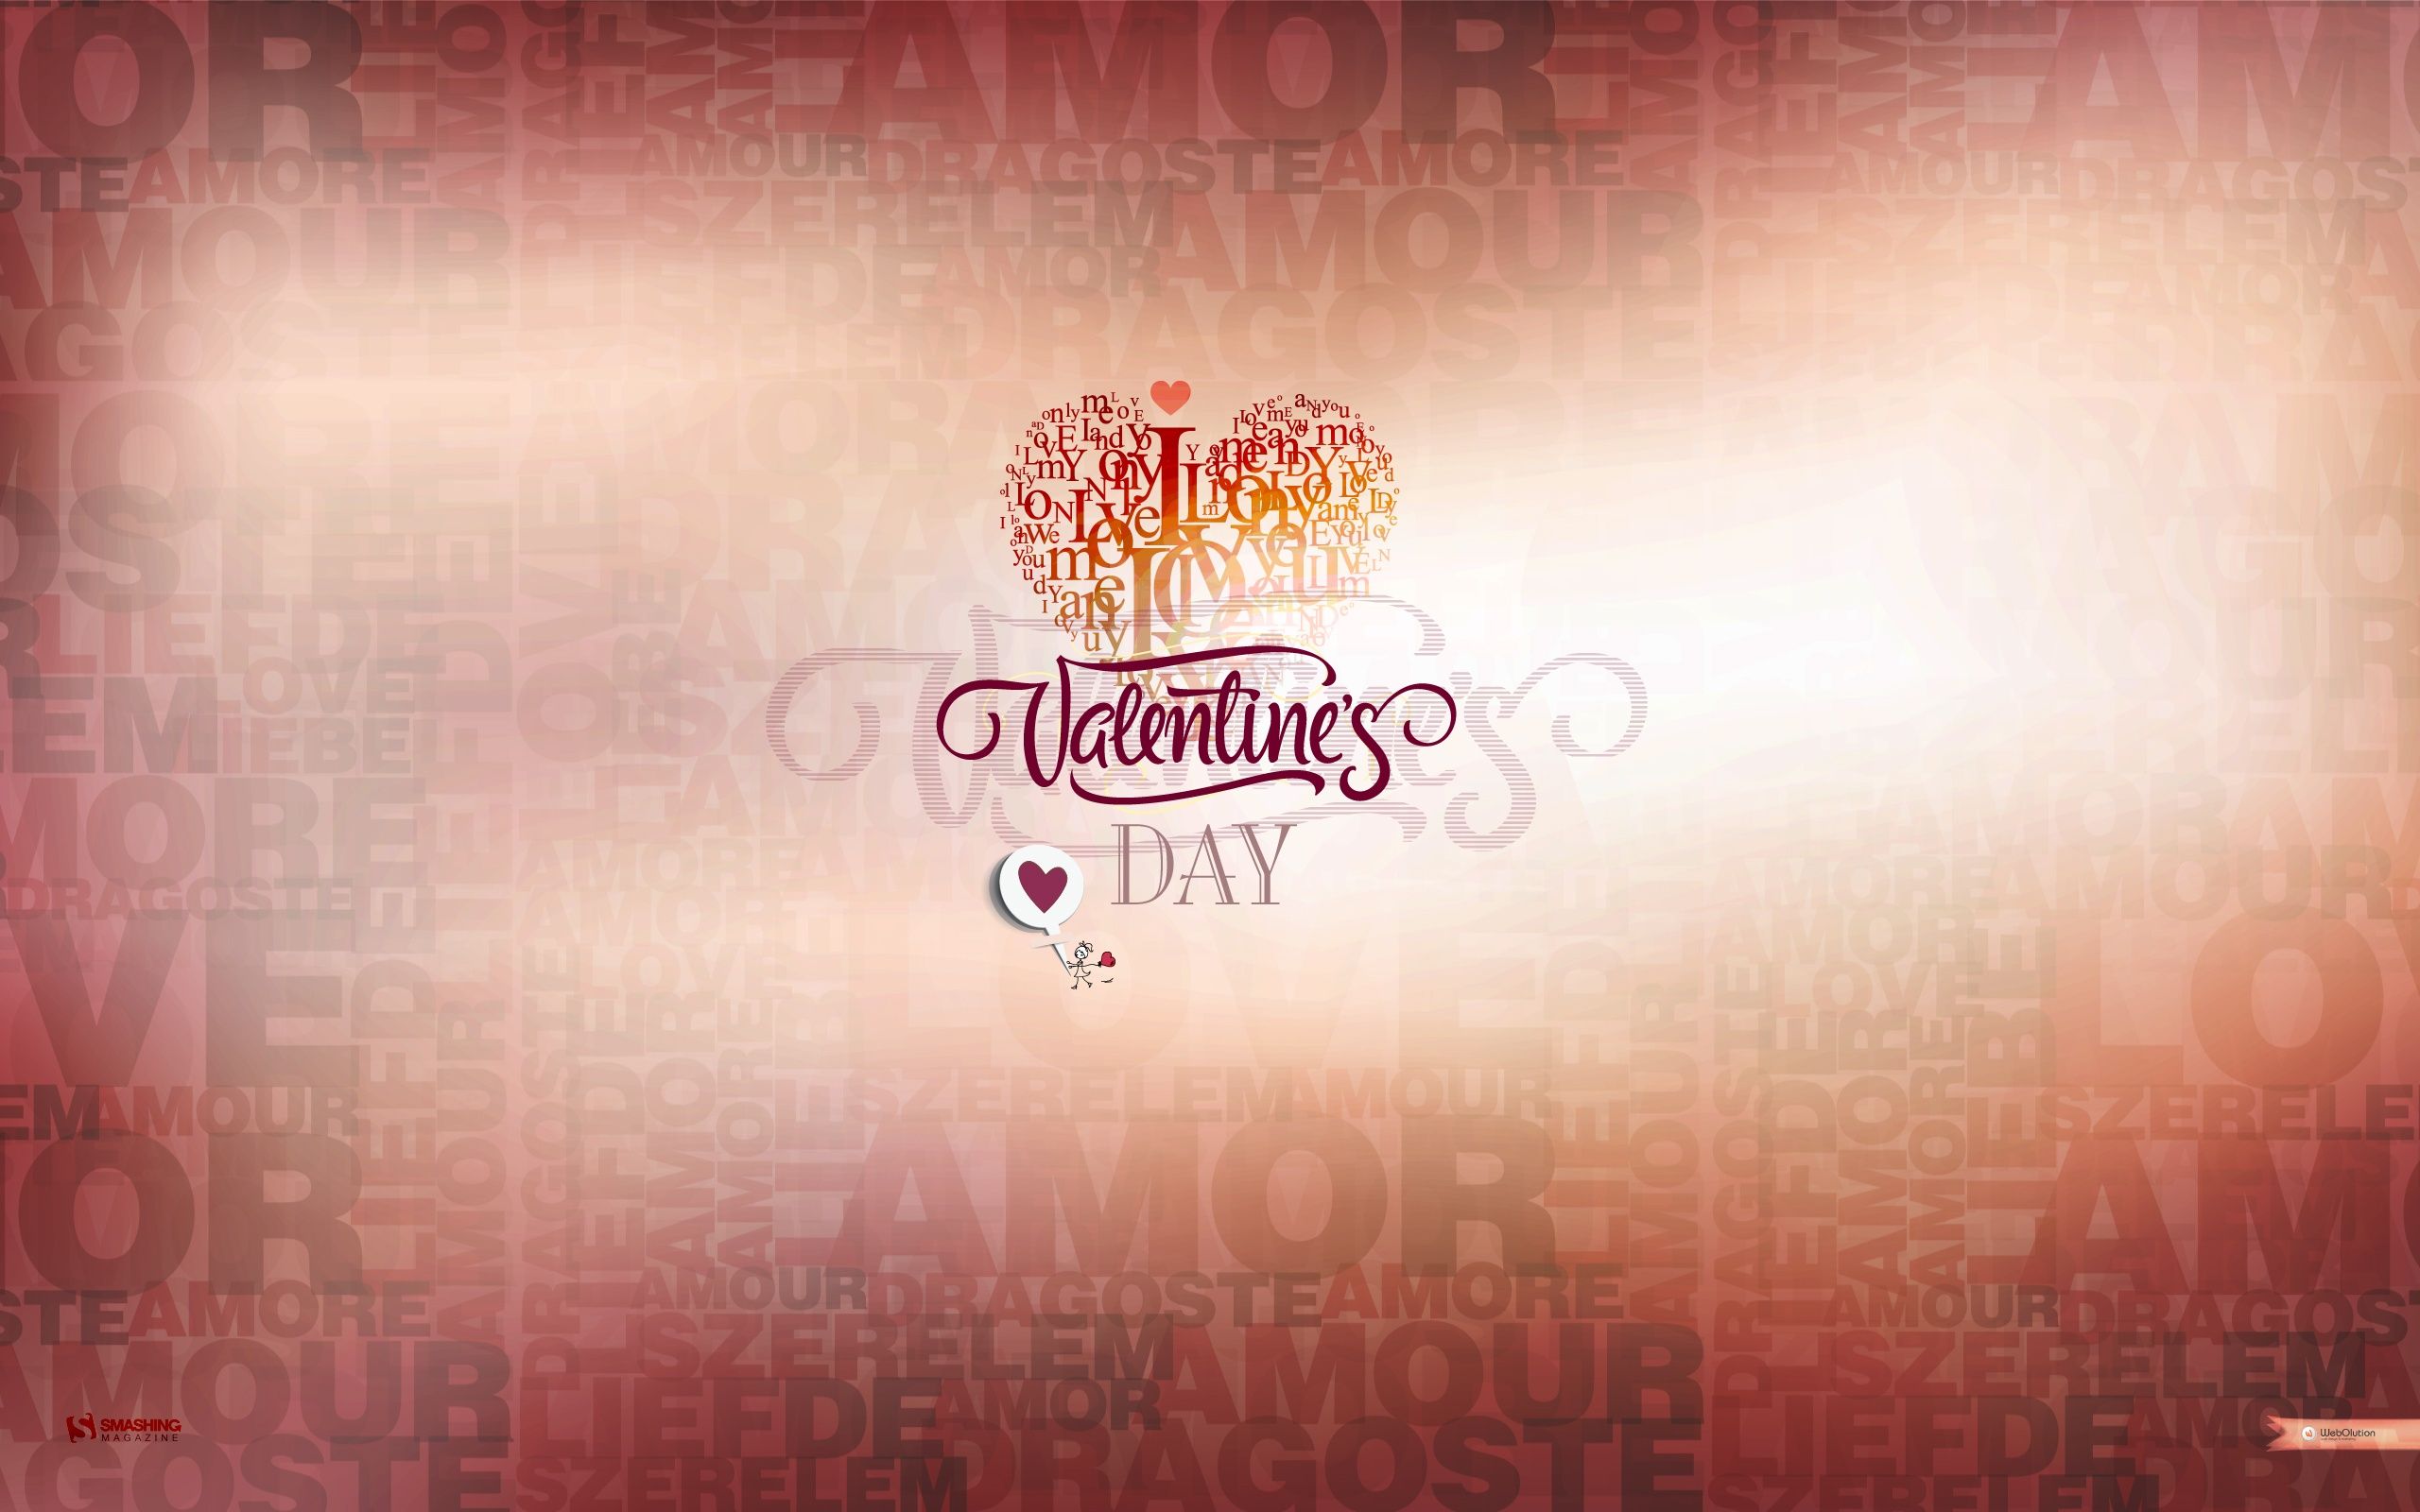 HD wallpaper, Day, Valentines, February, 14